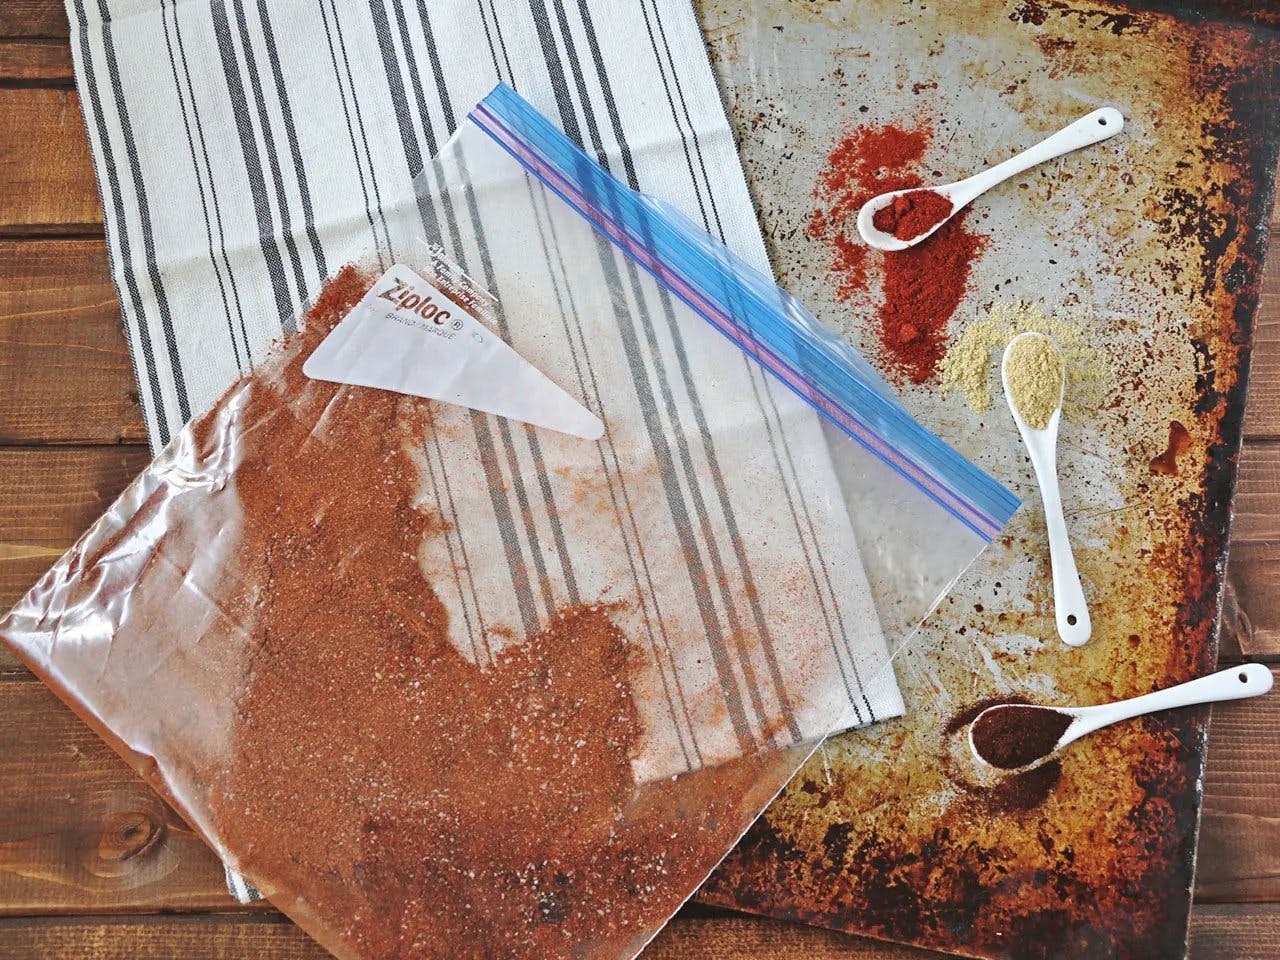 Smoked paprika in Ziplog bag with teaspoons of spices.